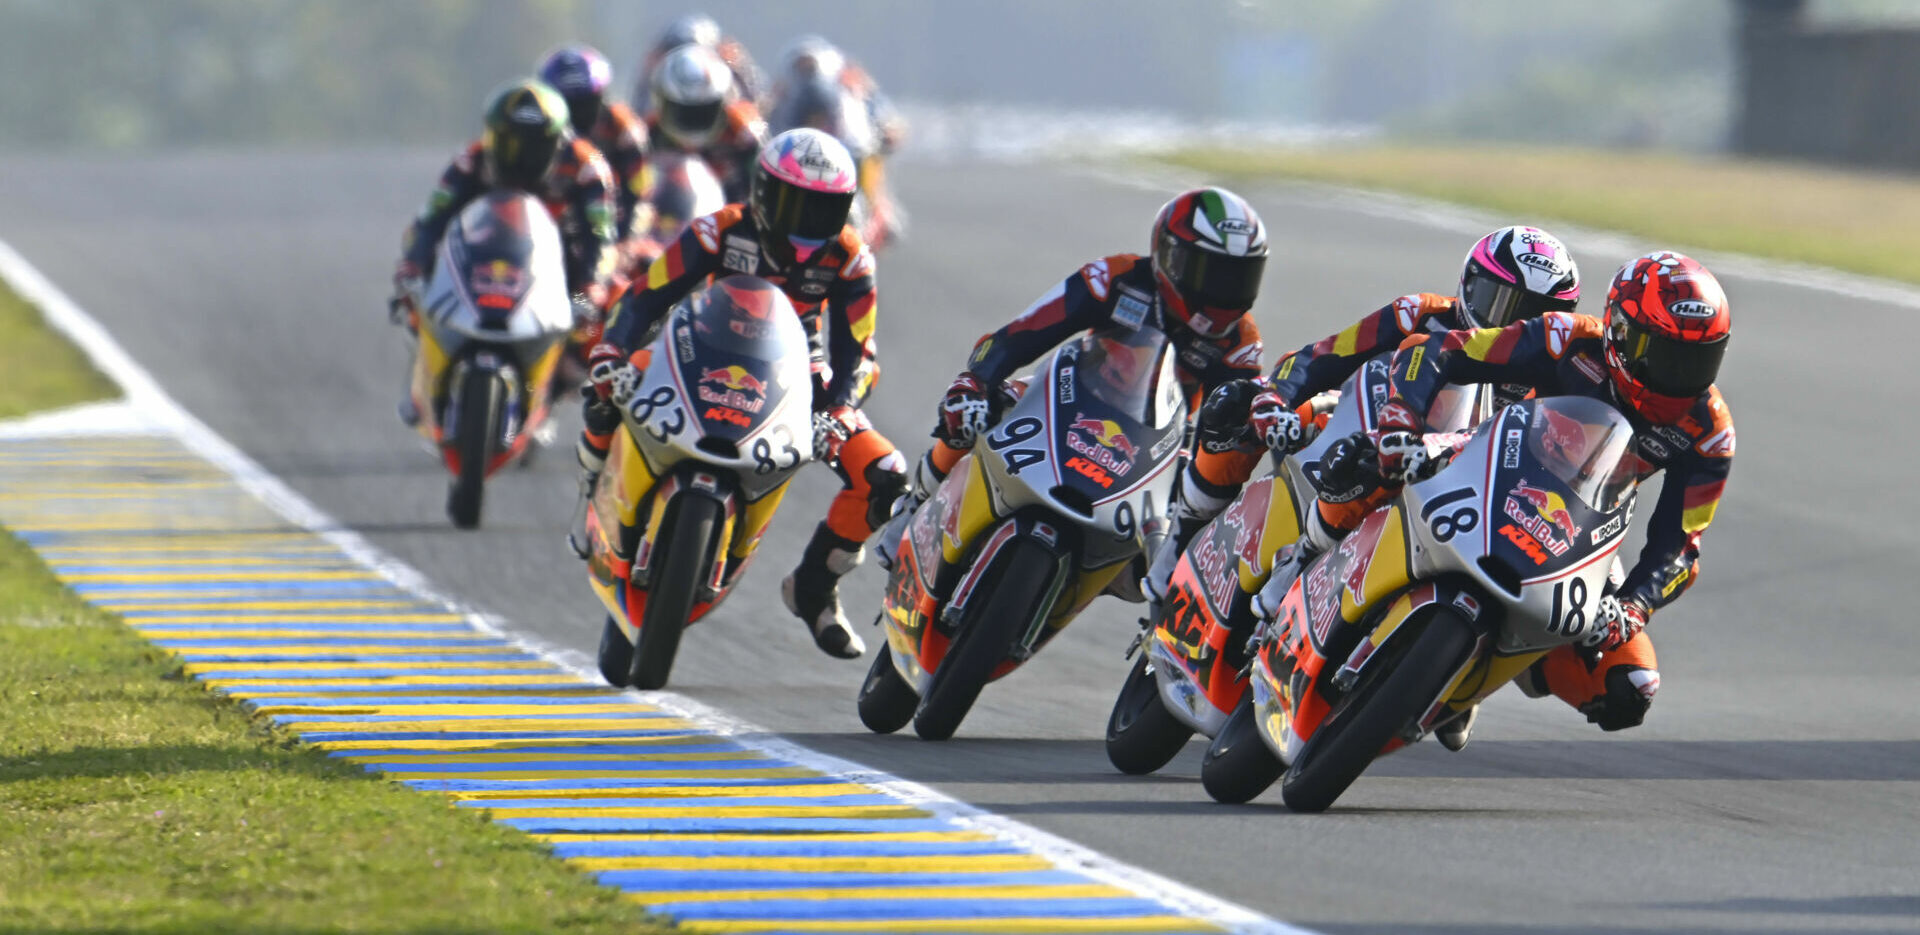 Angel Piqueras (18) leads Red Bull MotoGP Rookies Cup Race Two at Le Mans. Photo courtesy Red Bull.